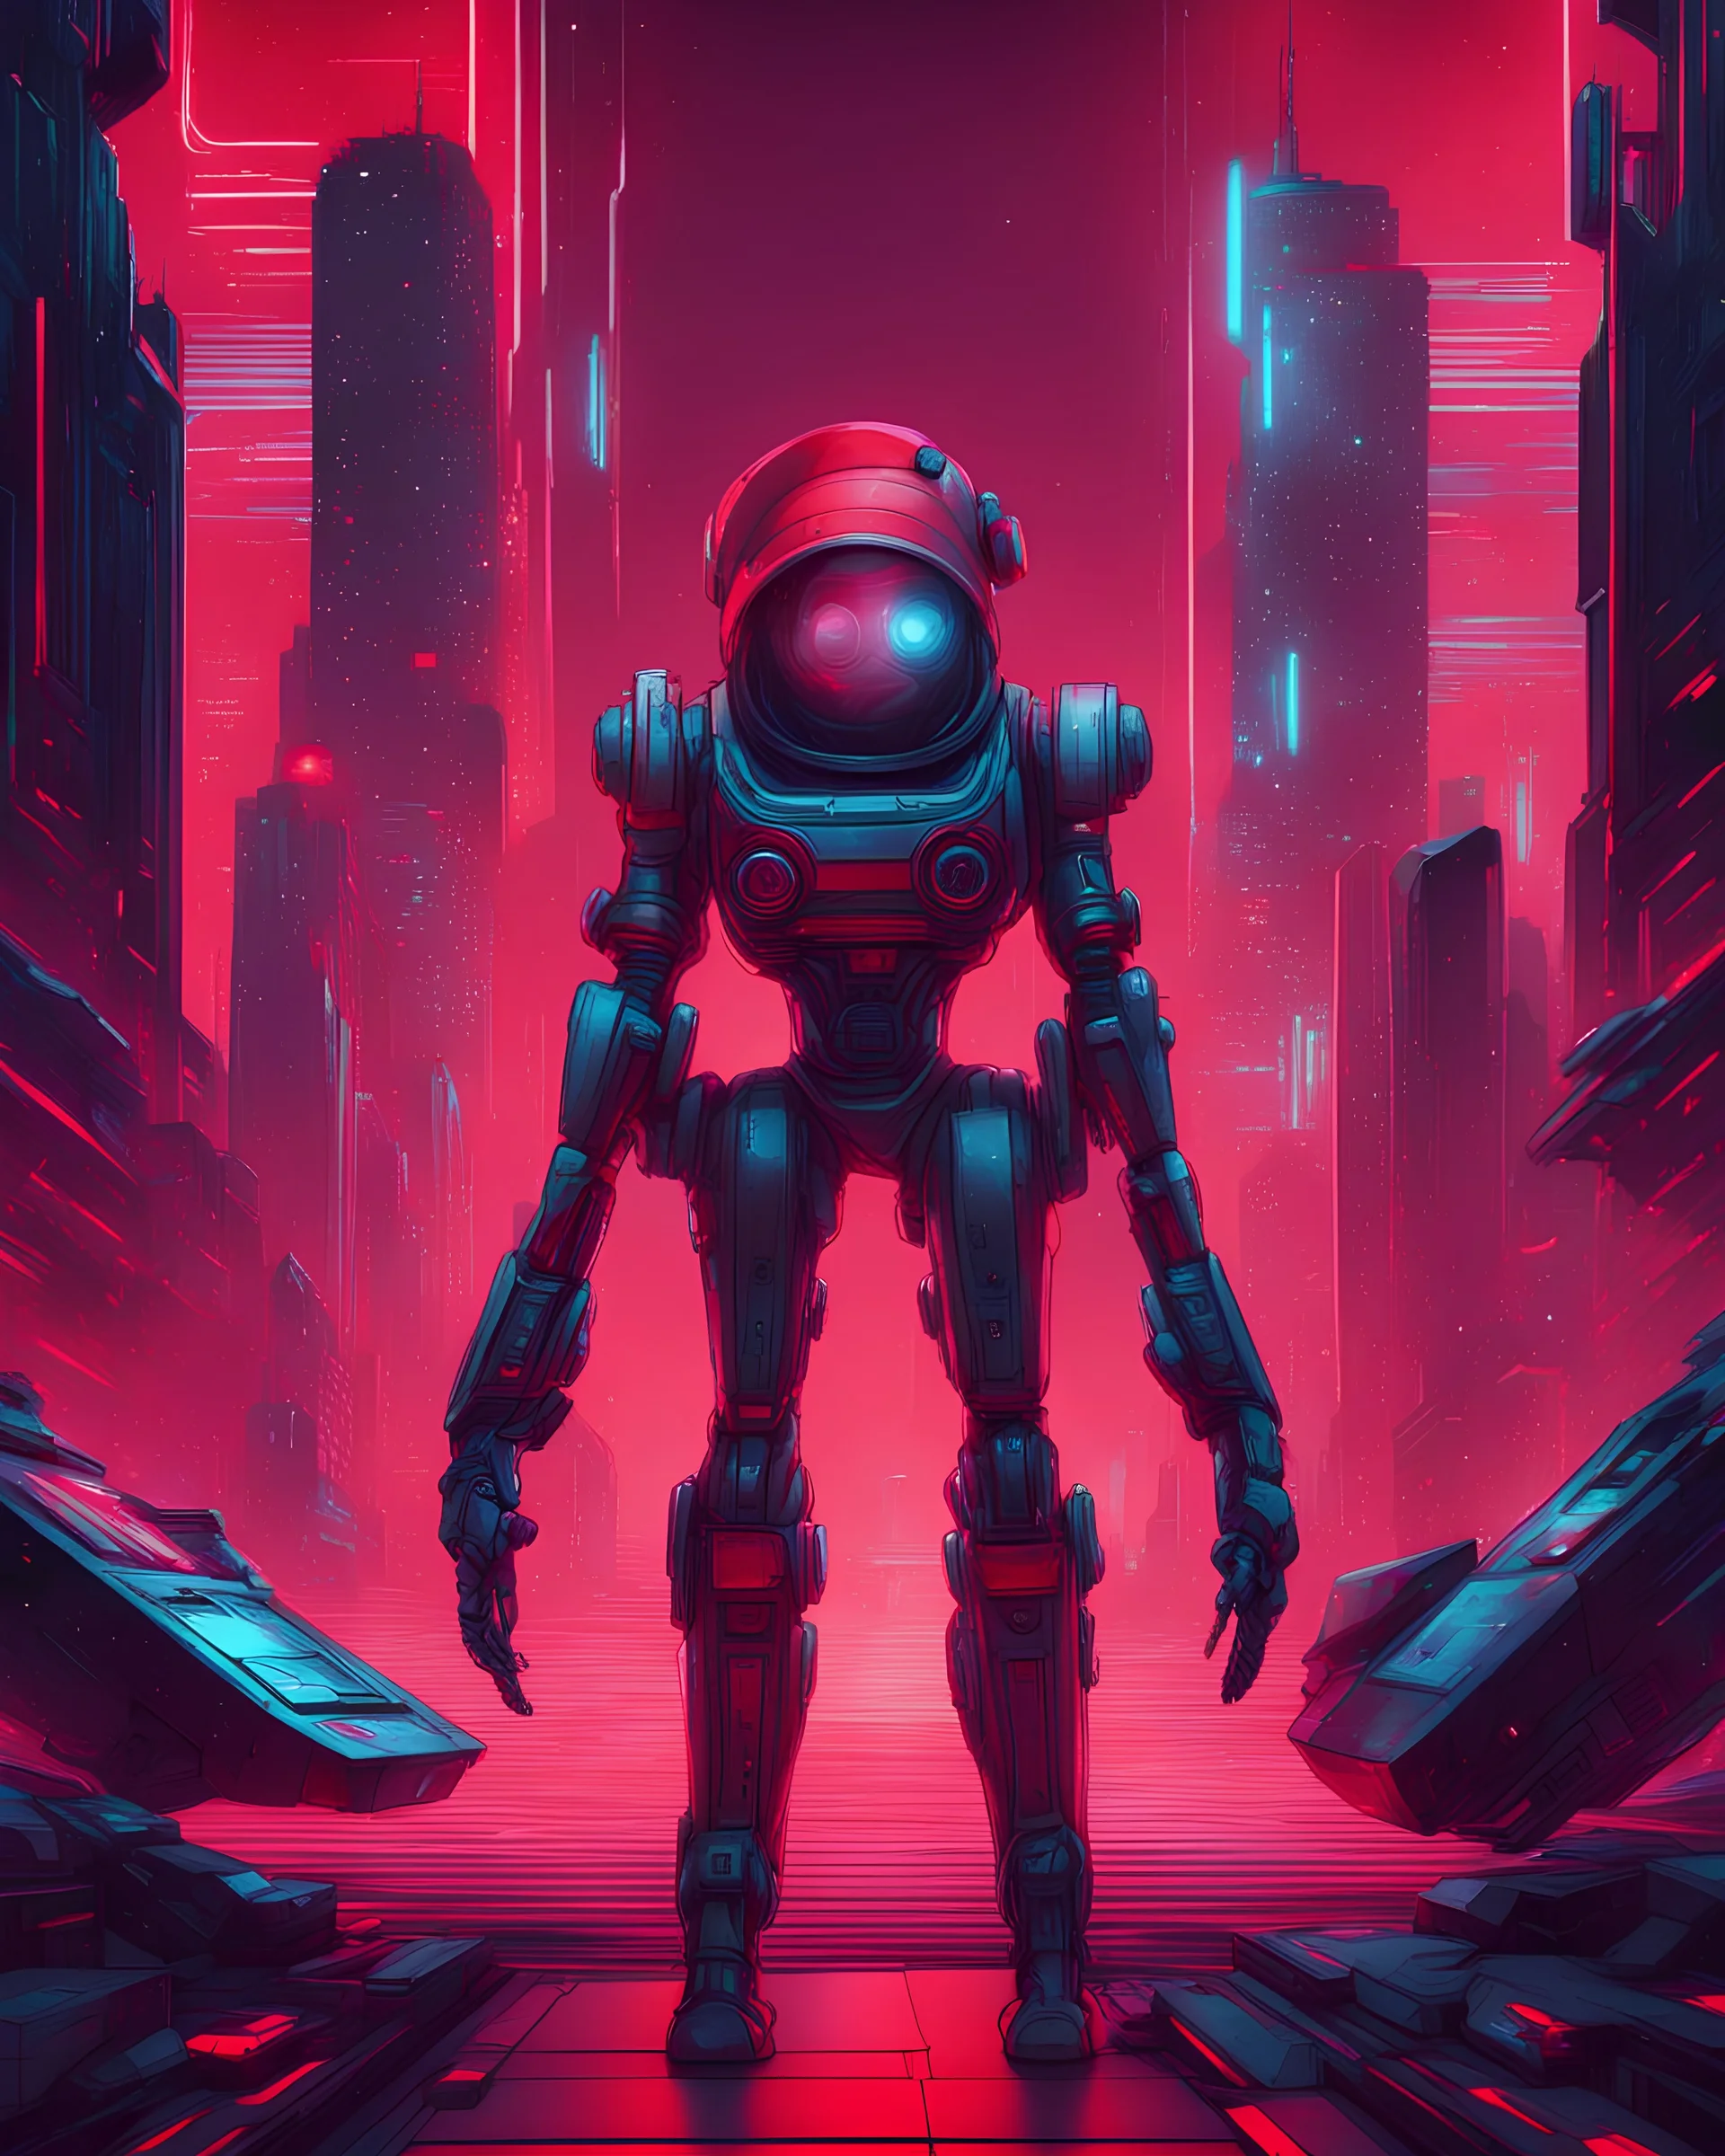 Futuristic Robotic Visions Cyberpunk Characters Space Warriors and Synth wave Aesthetics background red